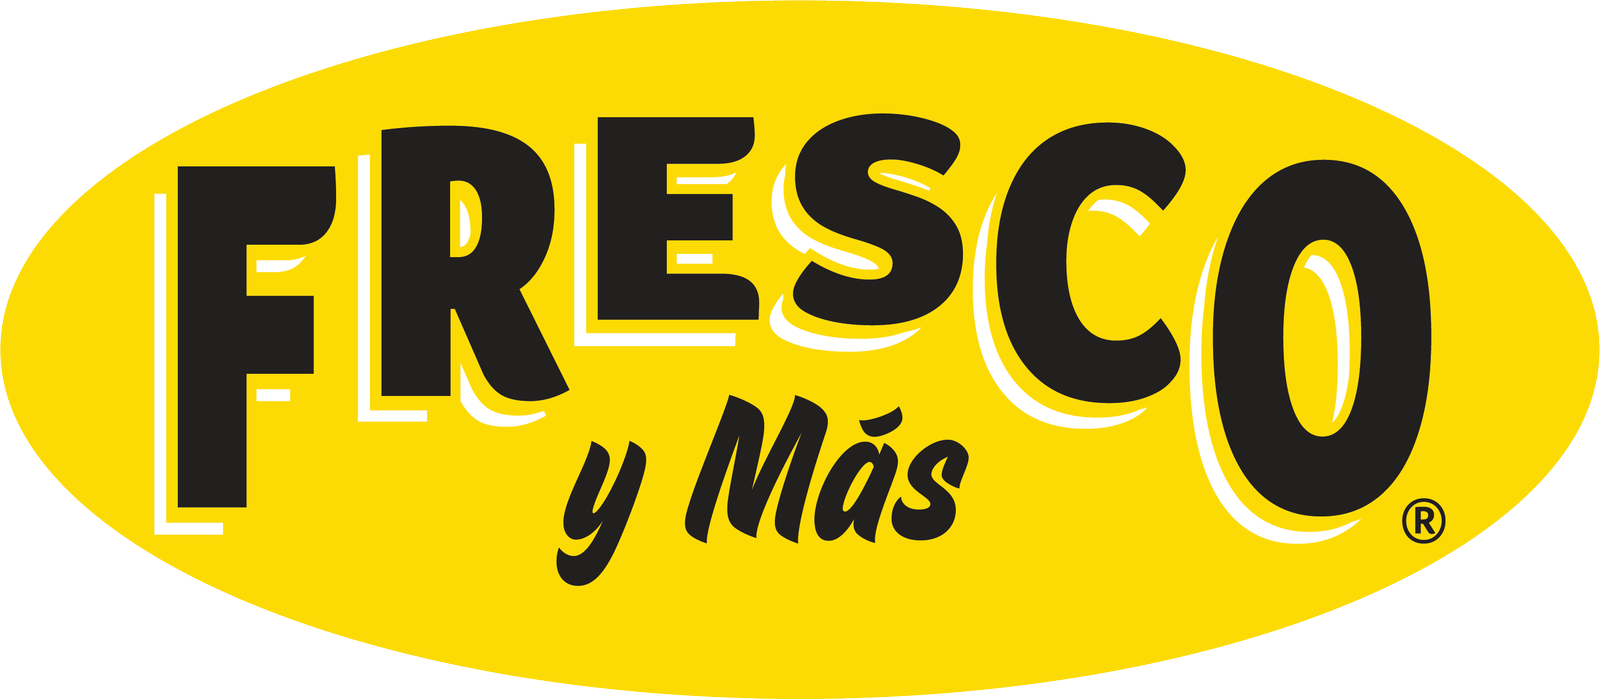 Fresco y Más Expands to Central and West Florida